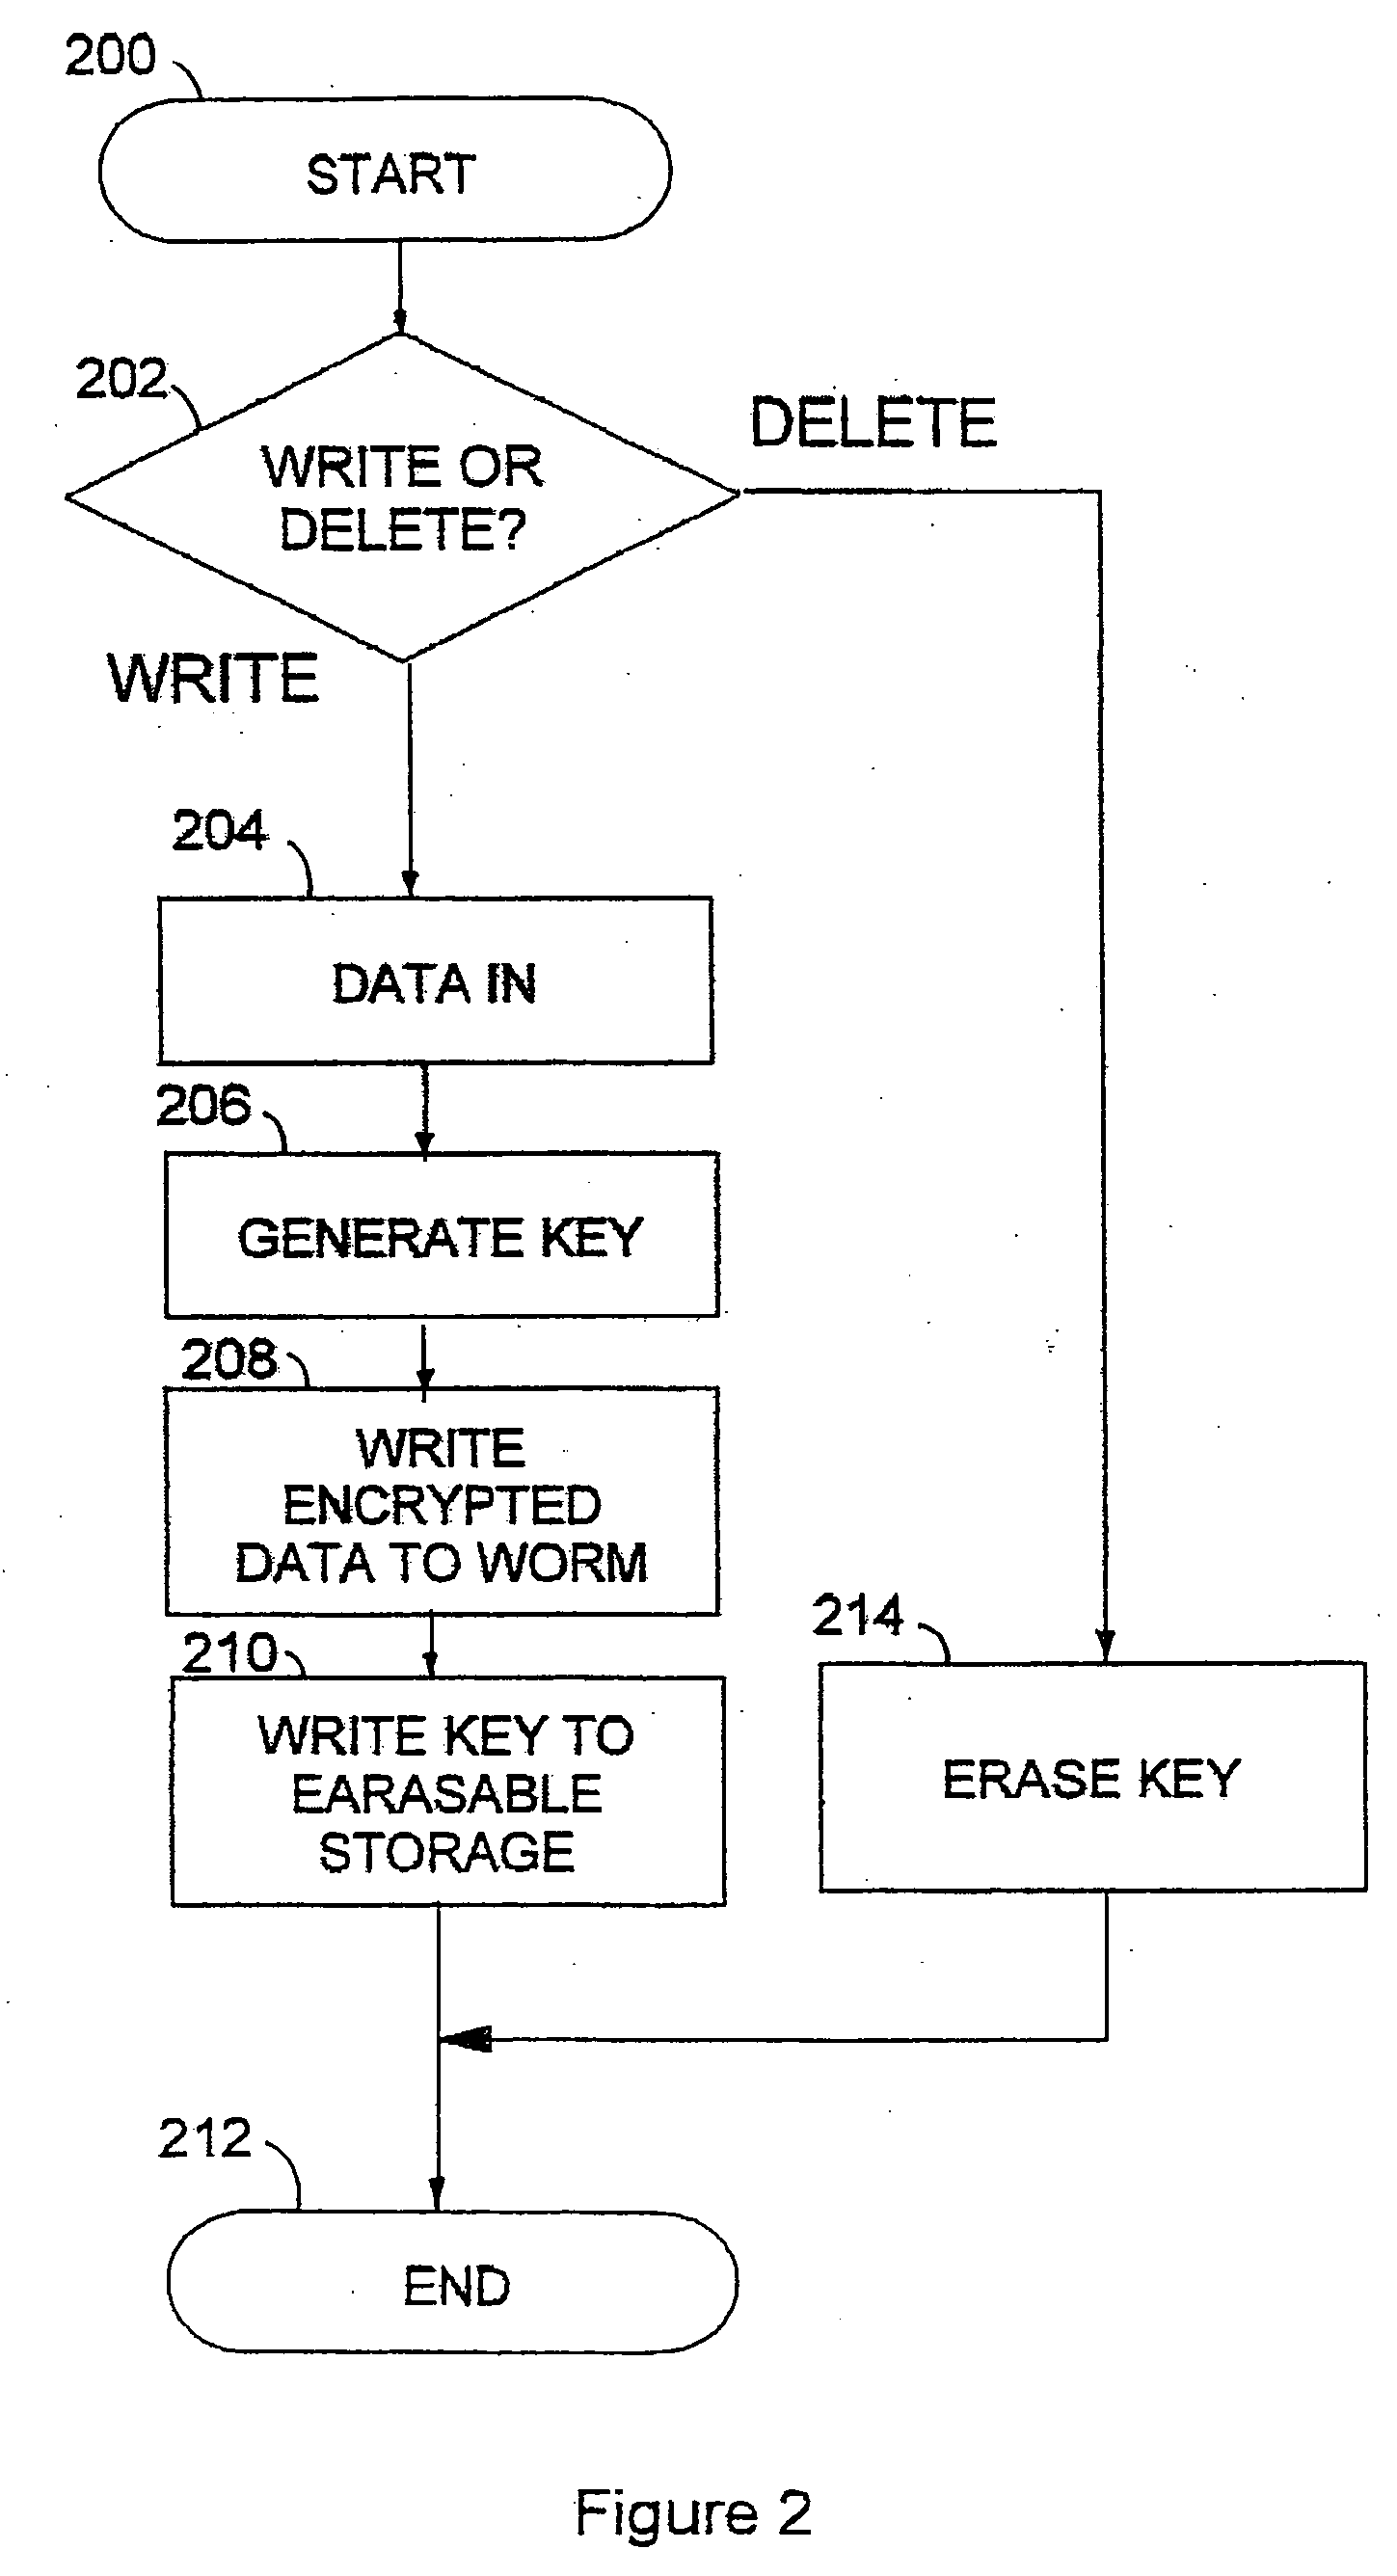 Method and apparatus for virtually erasing data from WORM storage devices